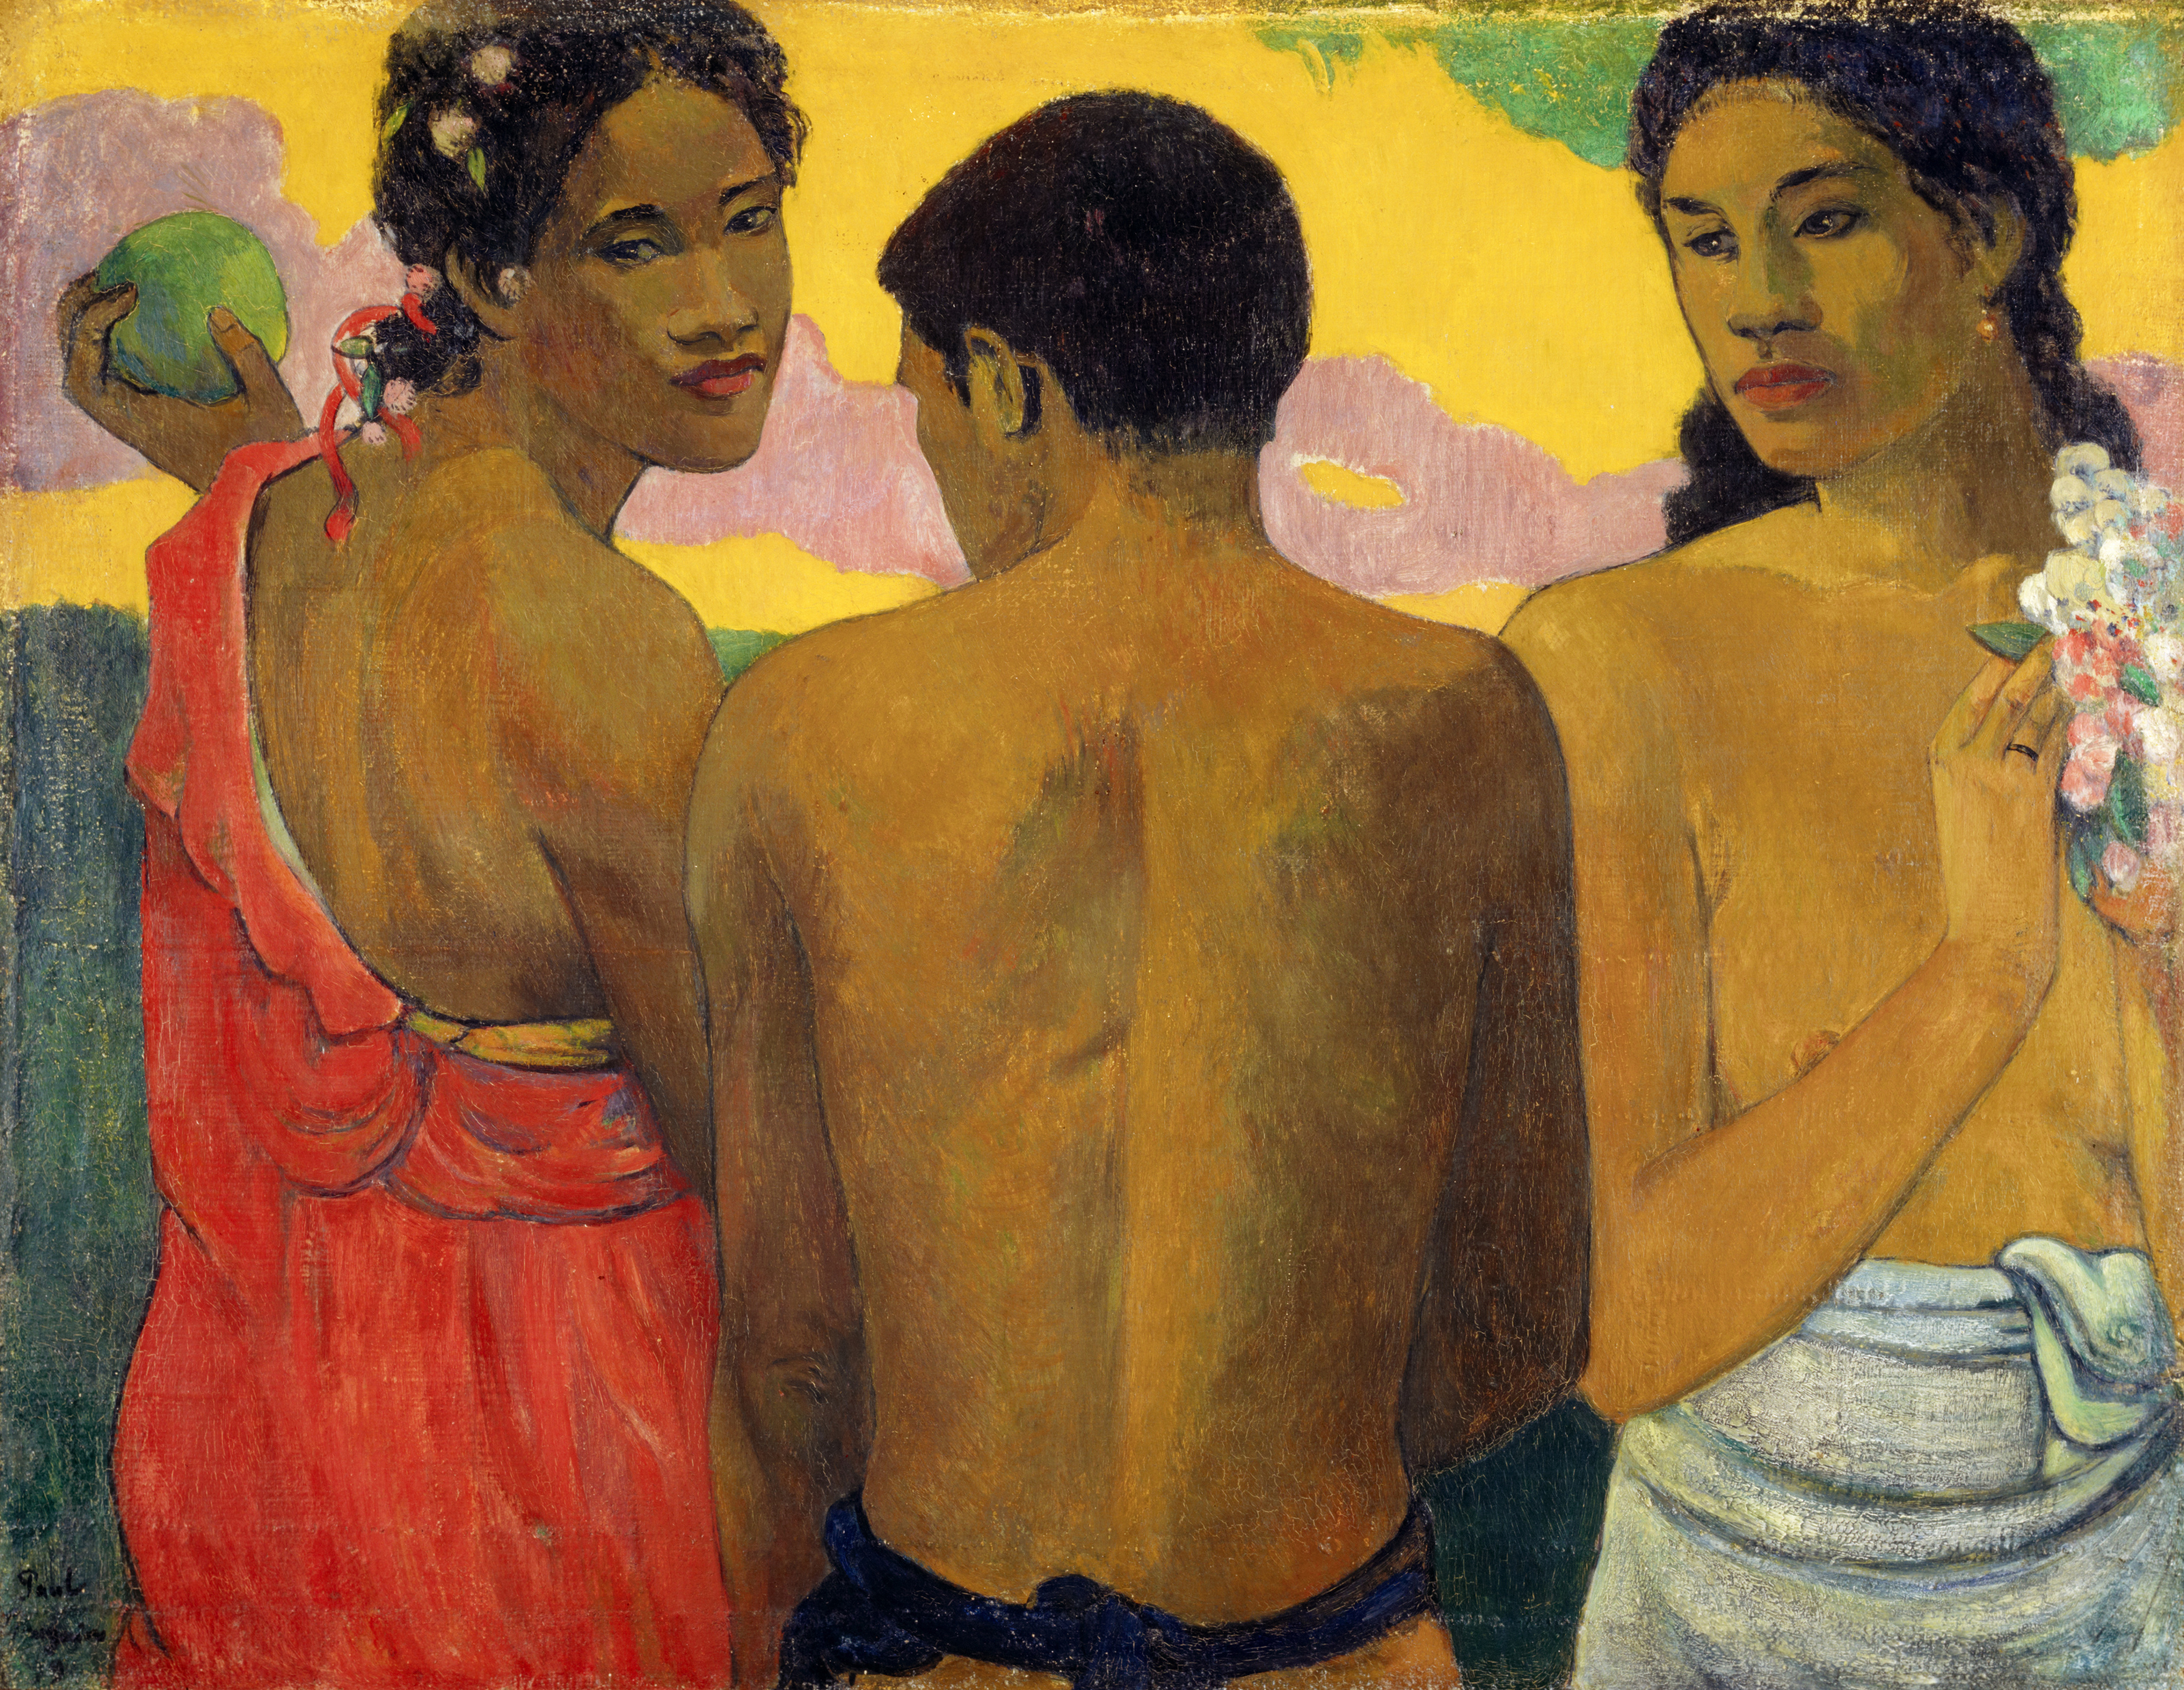 Three Tahitians by Paul Gauguin - 1899 - 73.00 x 94.00 cm National Galleries of Scotland